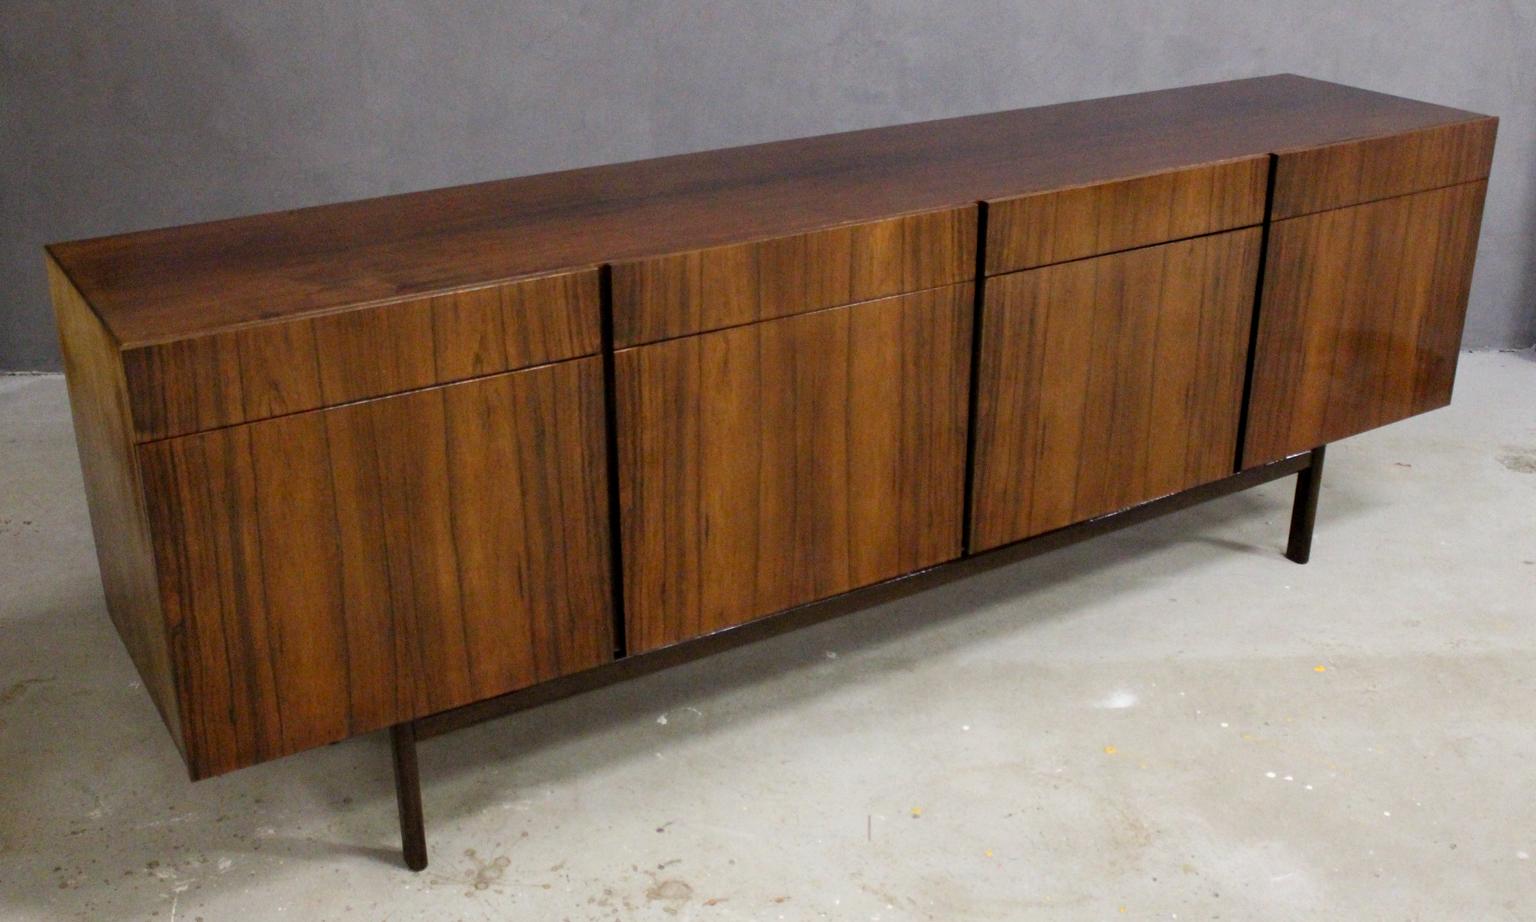 This Ib Kofod-Larsen FA66 can be considered royalty among Danish midcentury design credenzas. This long sideboard is segmented in four drawers and four doors with vibrant rosewood veneer that tickles your senses. The left door hides each three small